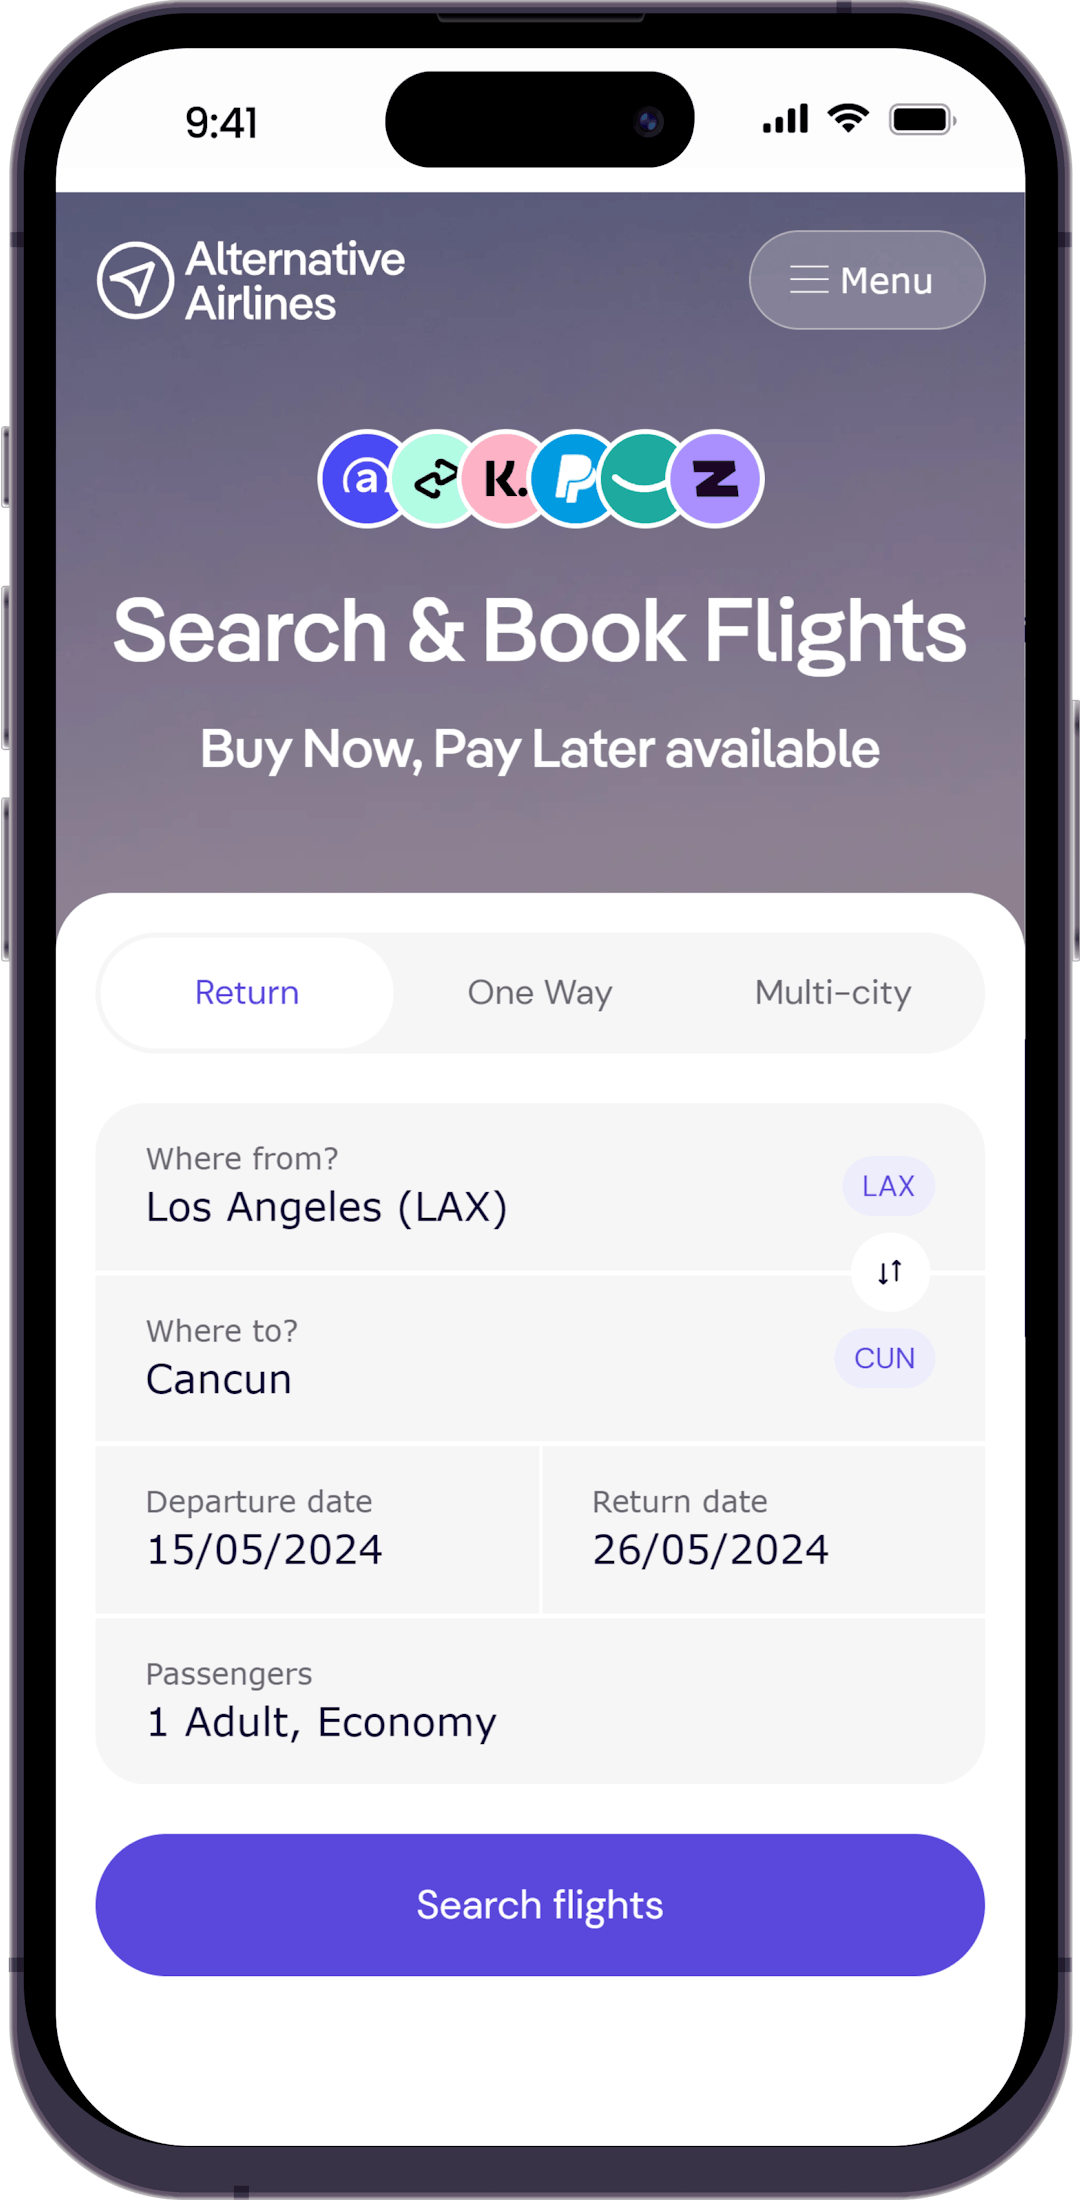 Step 1 - Select return and search for flights